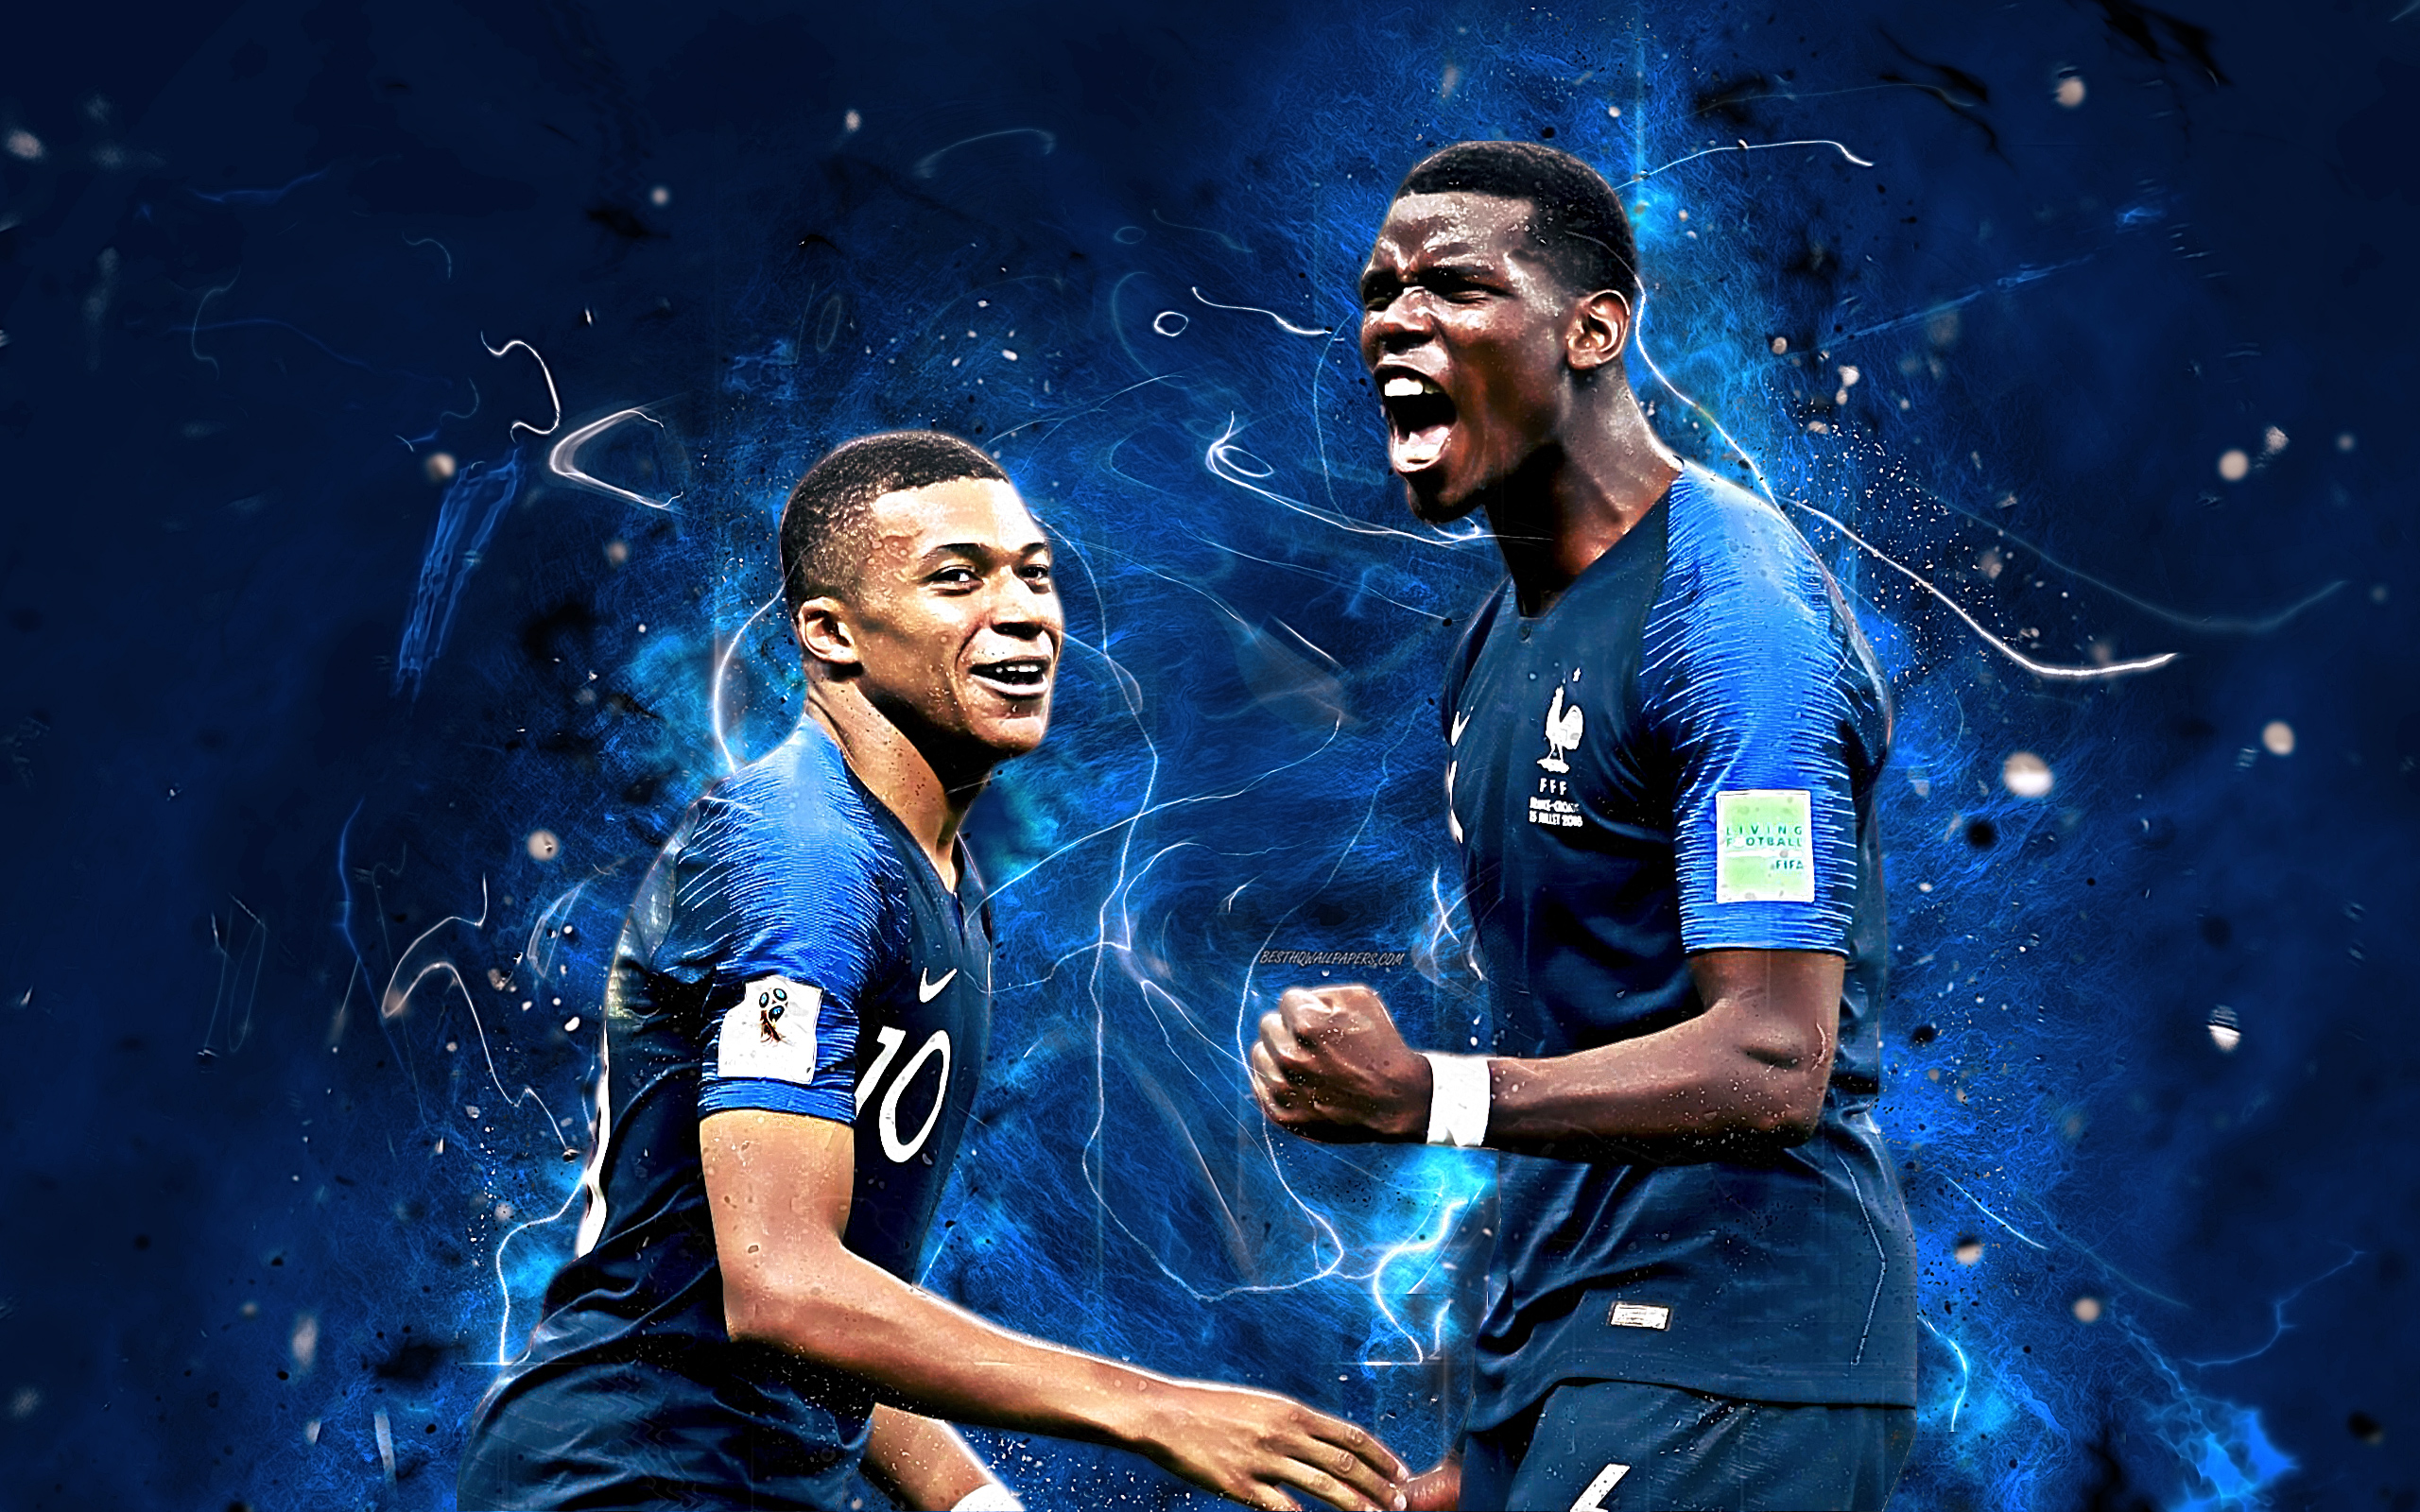 Download wallpaper Kylian Mbappe, Paul Pogba, football stars, France National Team, fan art, Pogba, Mbappe, soccer, footballers, FFF, neon lights, French football team for desktop with resolution 2560x1600. High Quality HD picture